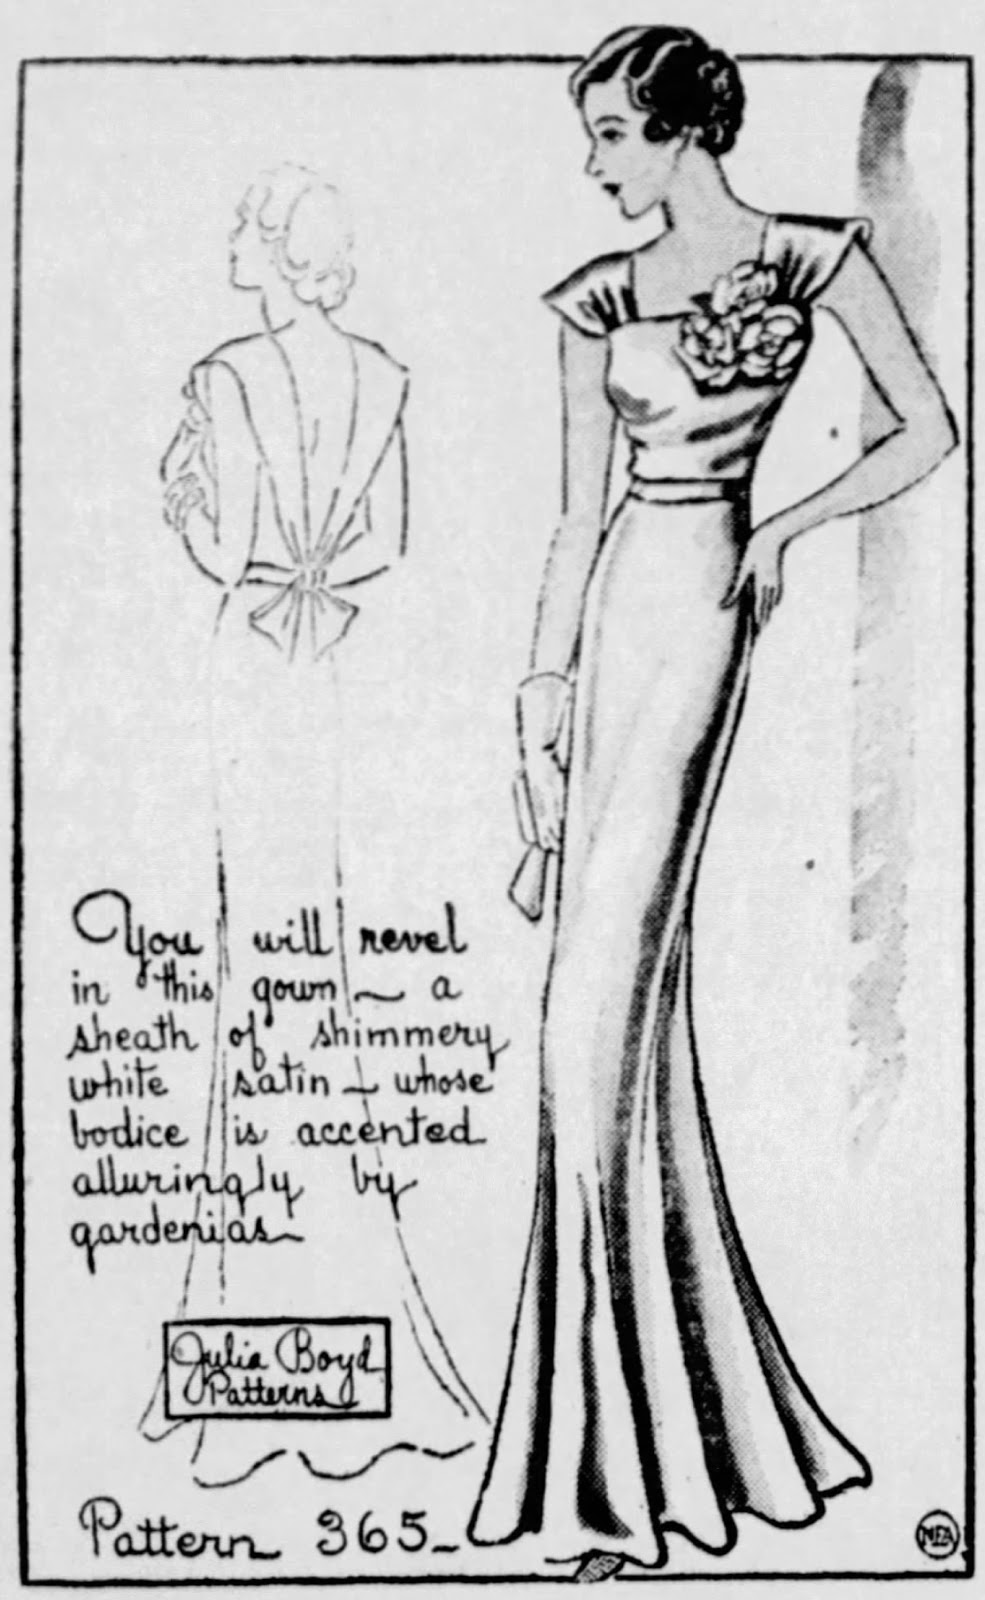 1 Quoted in "Whets Women s Interest in Style" by Marion Young in St Louis Star Times July 13 1934 page 11 The photograph below is from the same